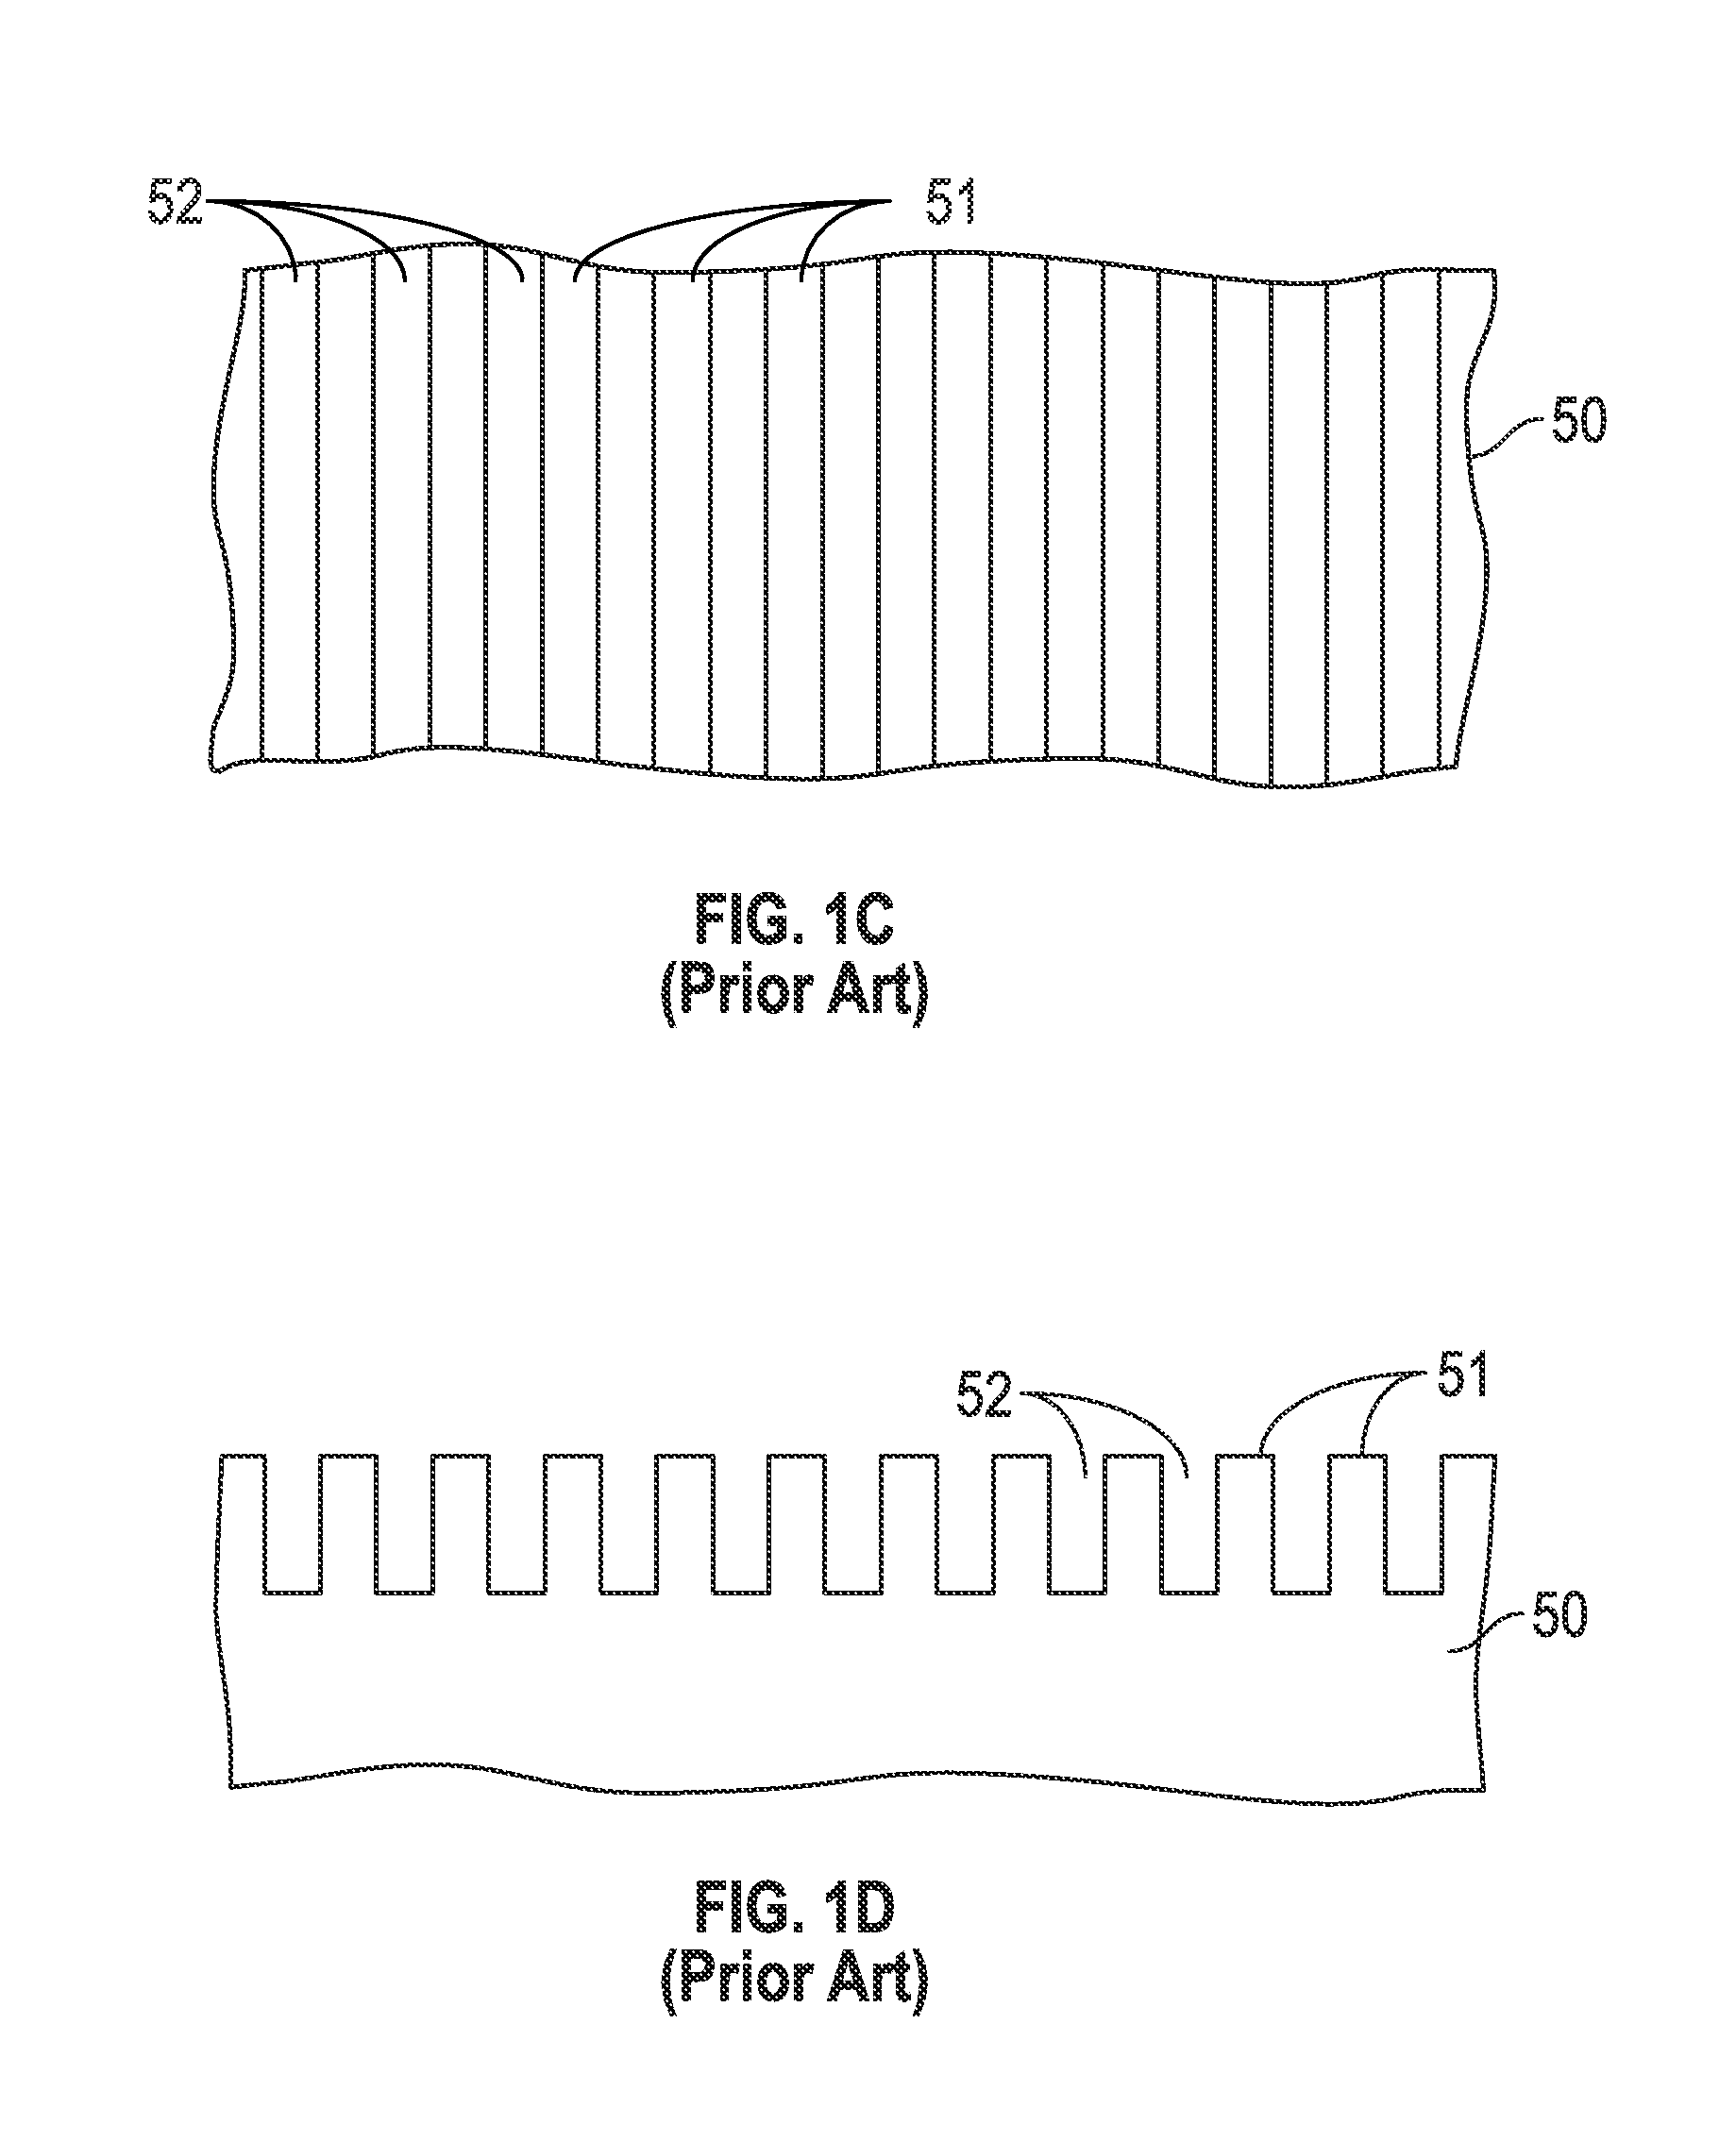 Method for making a chemical contrast pattern using block copolymers and sequential infiltration synthesis